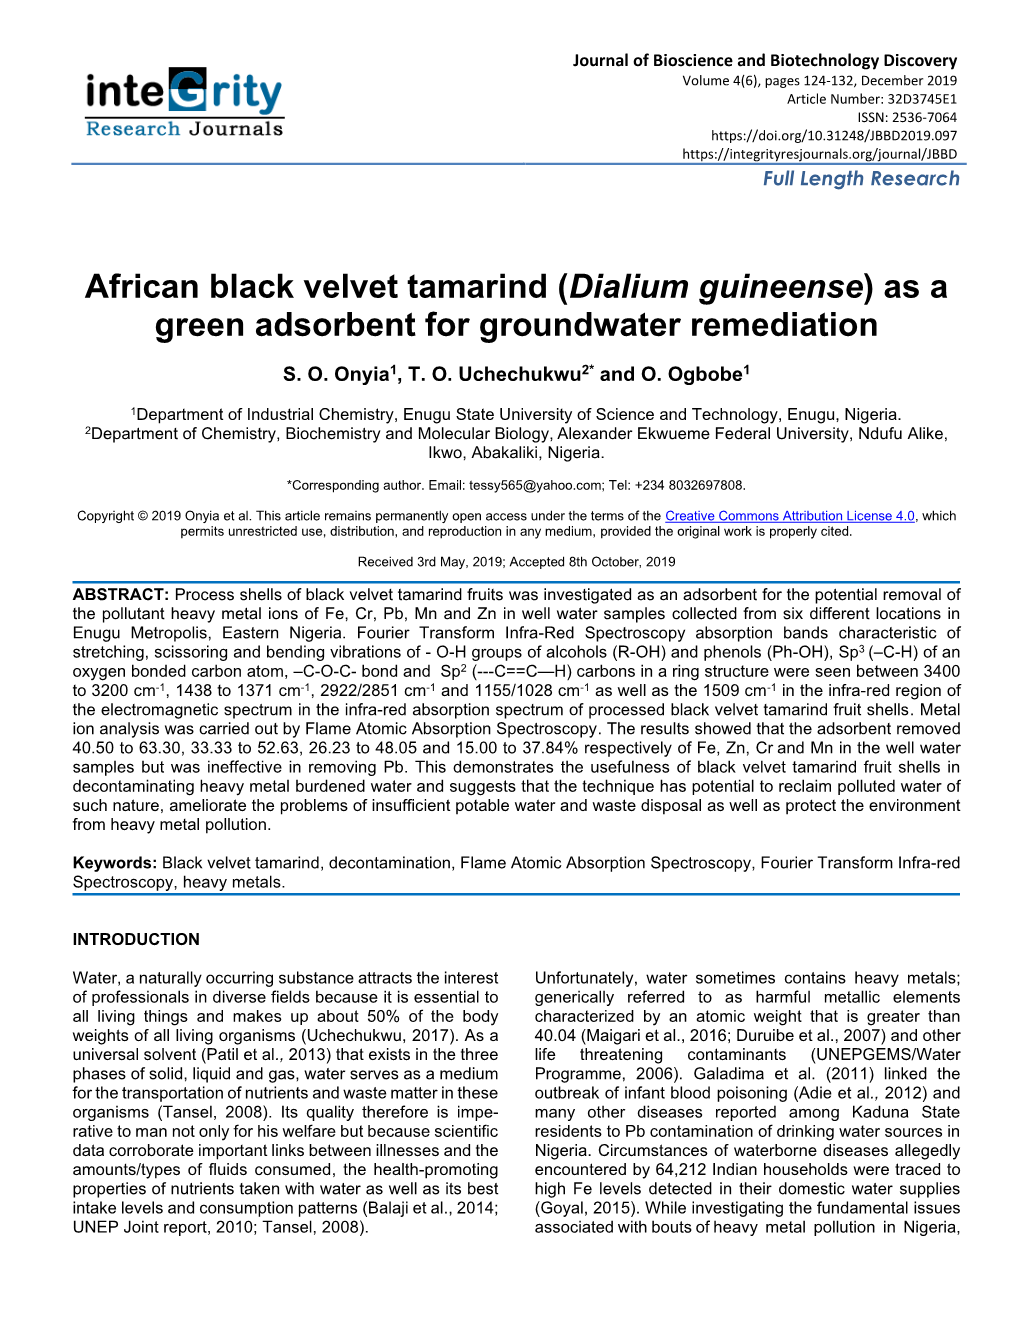 African Black Velvet Tamarind (Dialium Guineense) As a Green Adsorbent for Groundwater Remediation